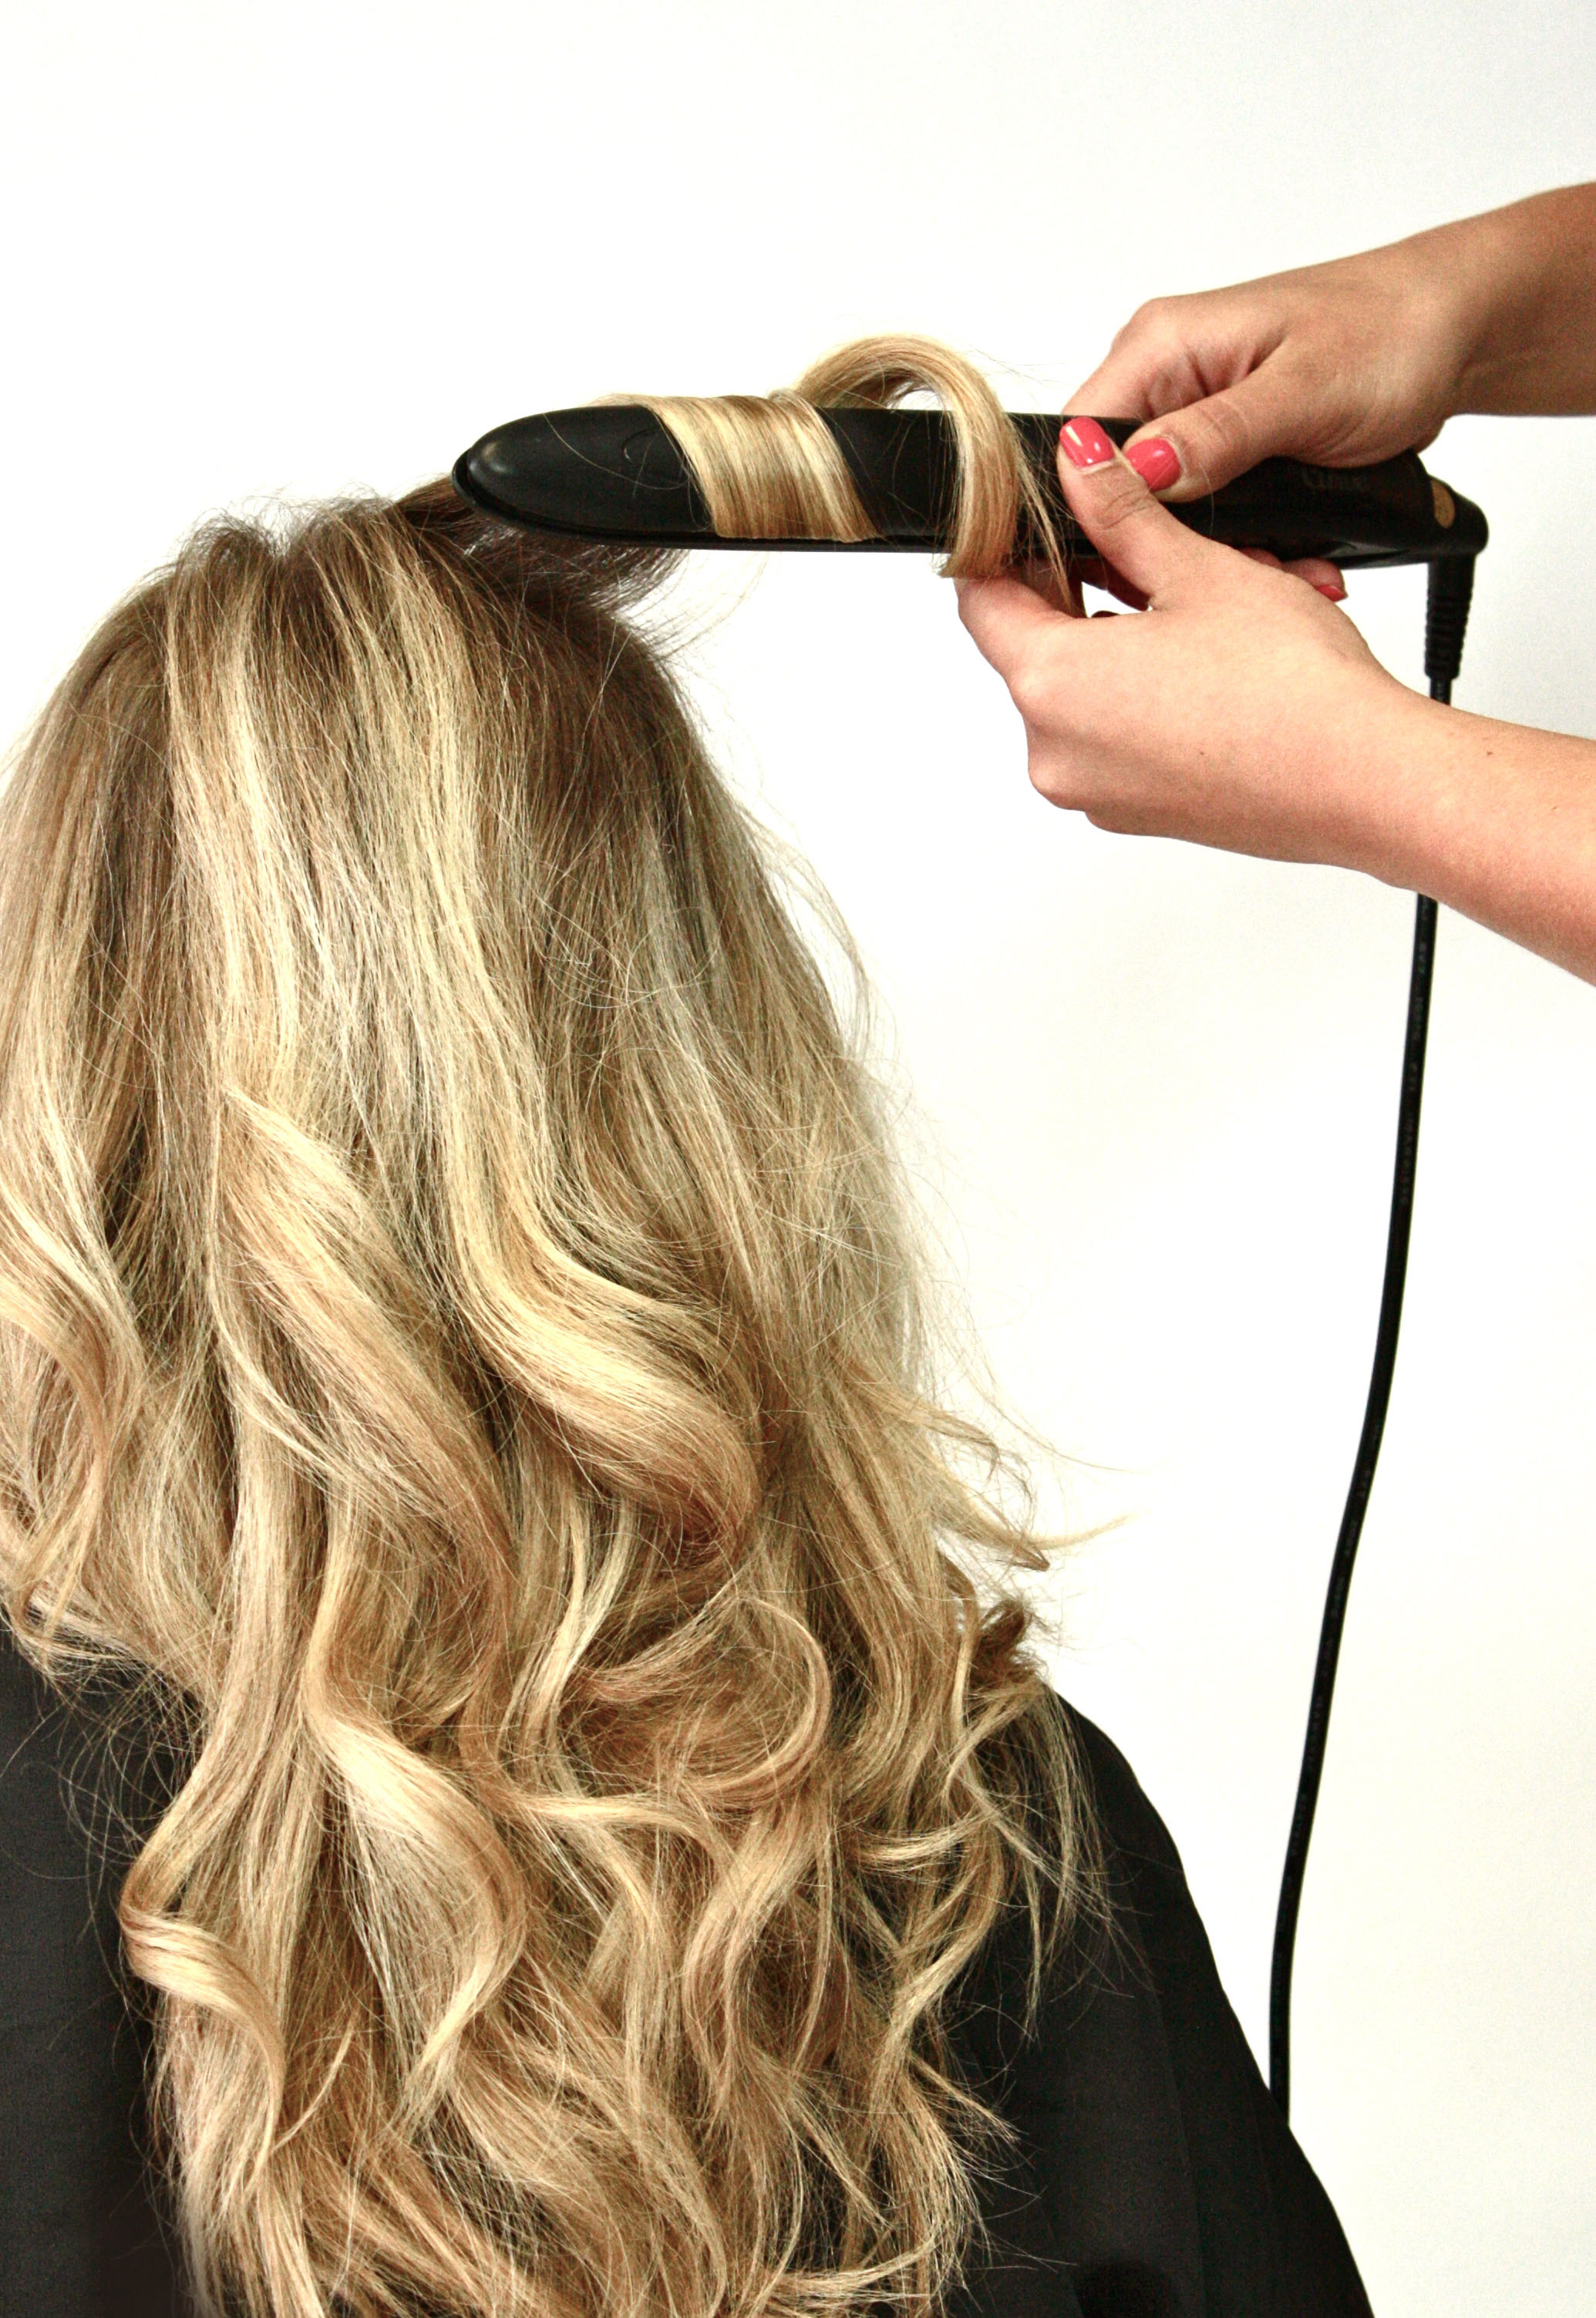 How To Curl Hair With A Flat Iron Siggershairdresserss Blog